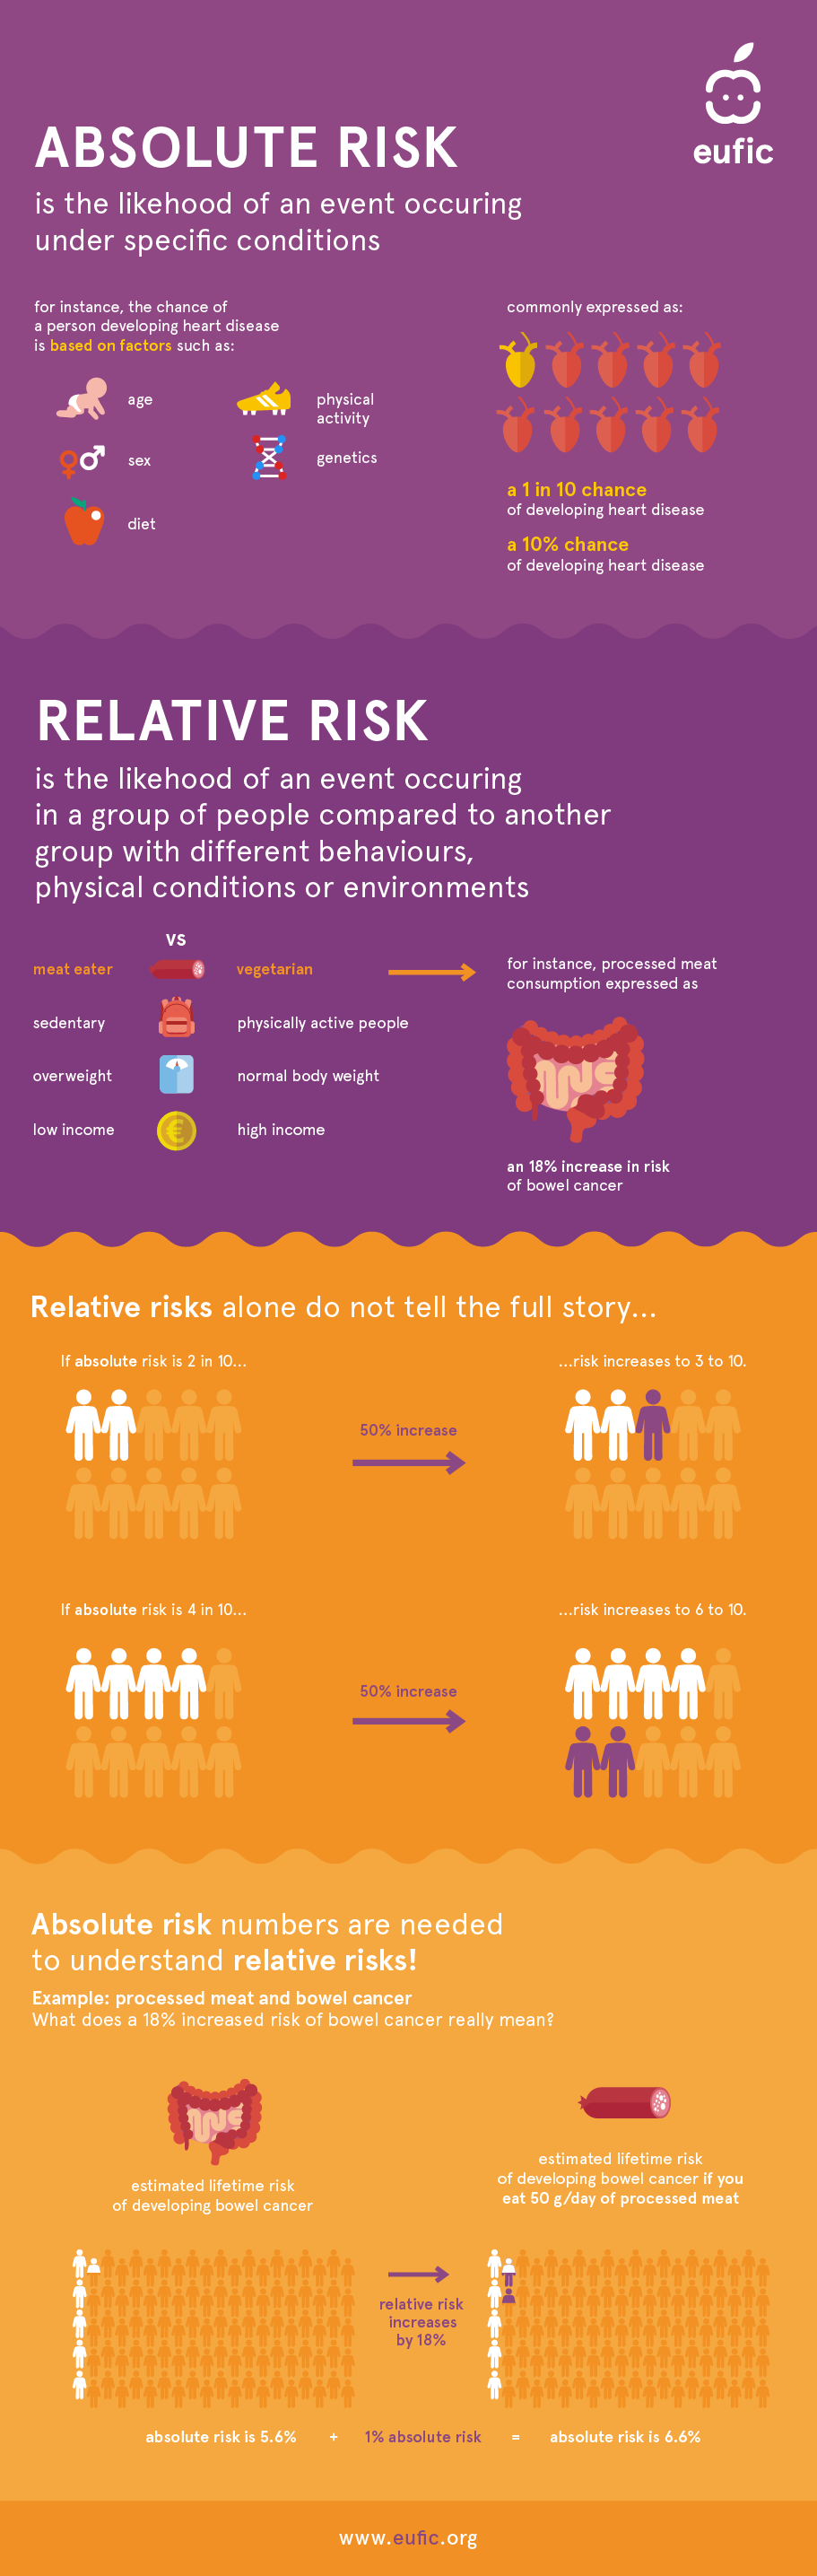 Infographic explaining the difference between absolute and relative risk